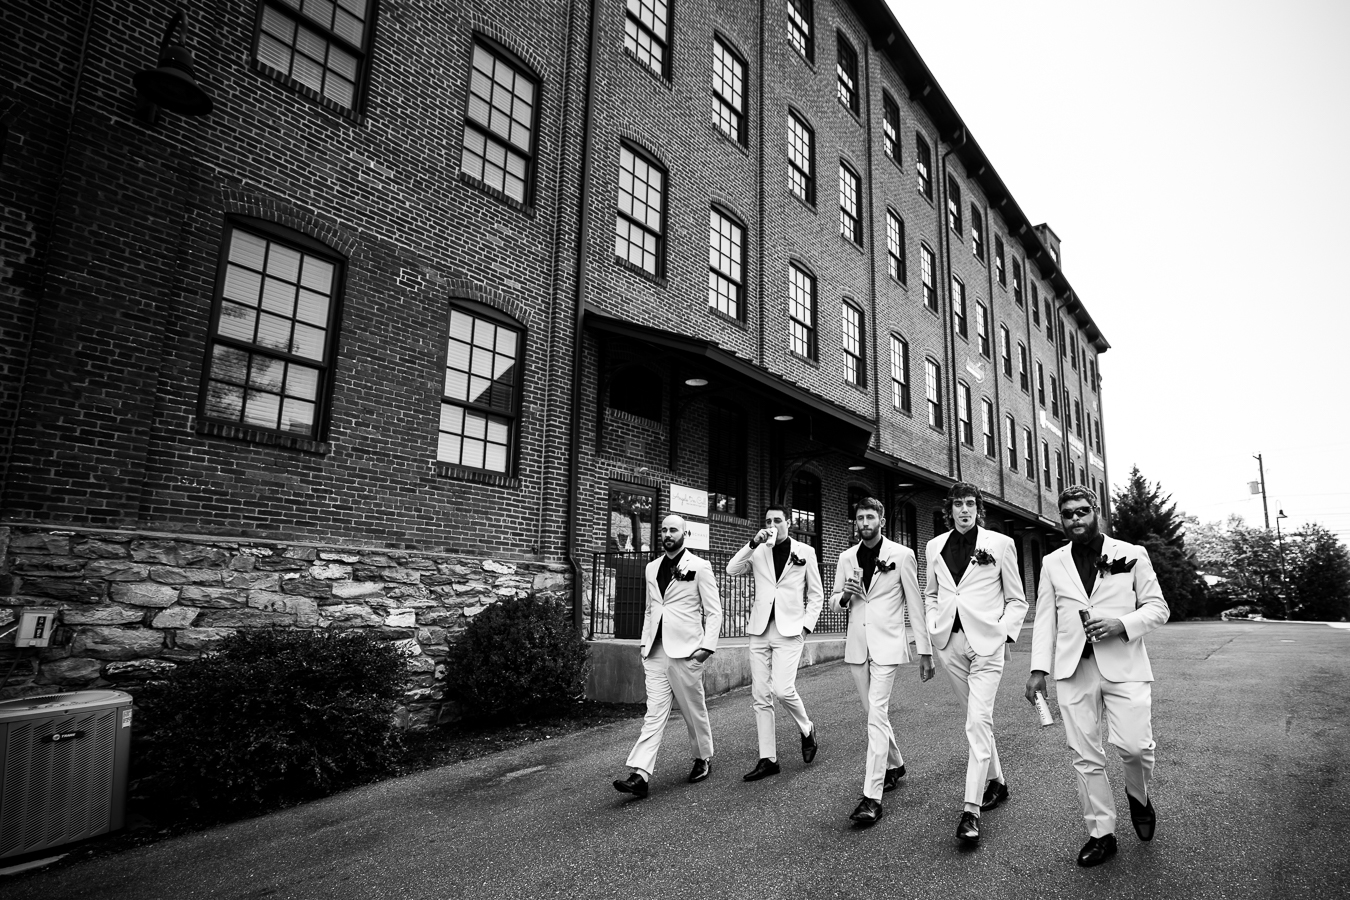 Cork Factory Hotel Wedding Photographer, lisa rhinehart, captures thi black and white image of the groom and his groomsmen as they walk down the street outside of the hotel before the wedding ceremony in lancaster